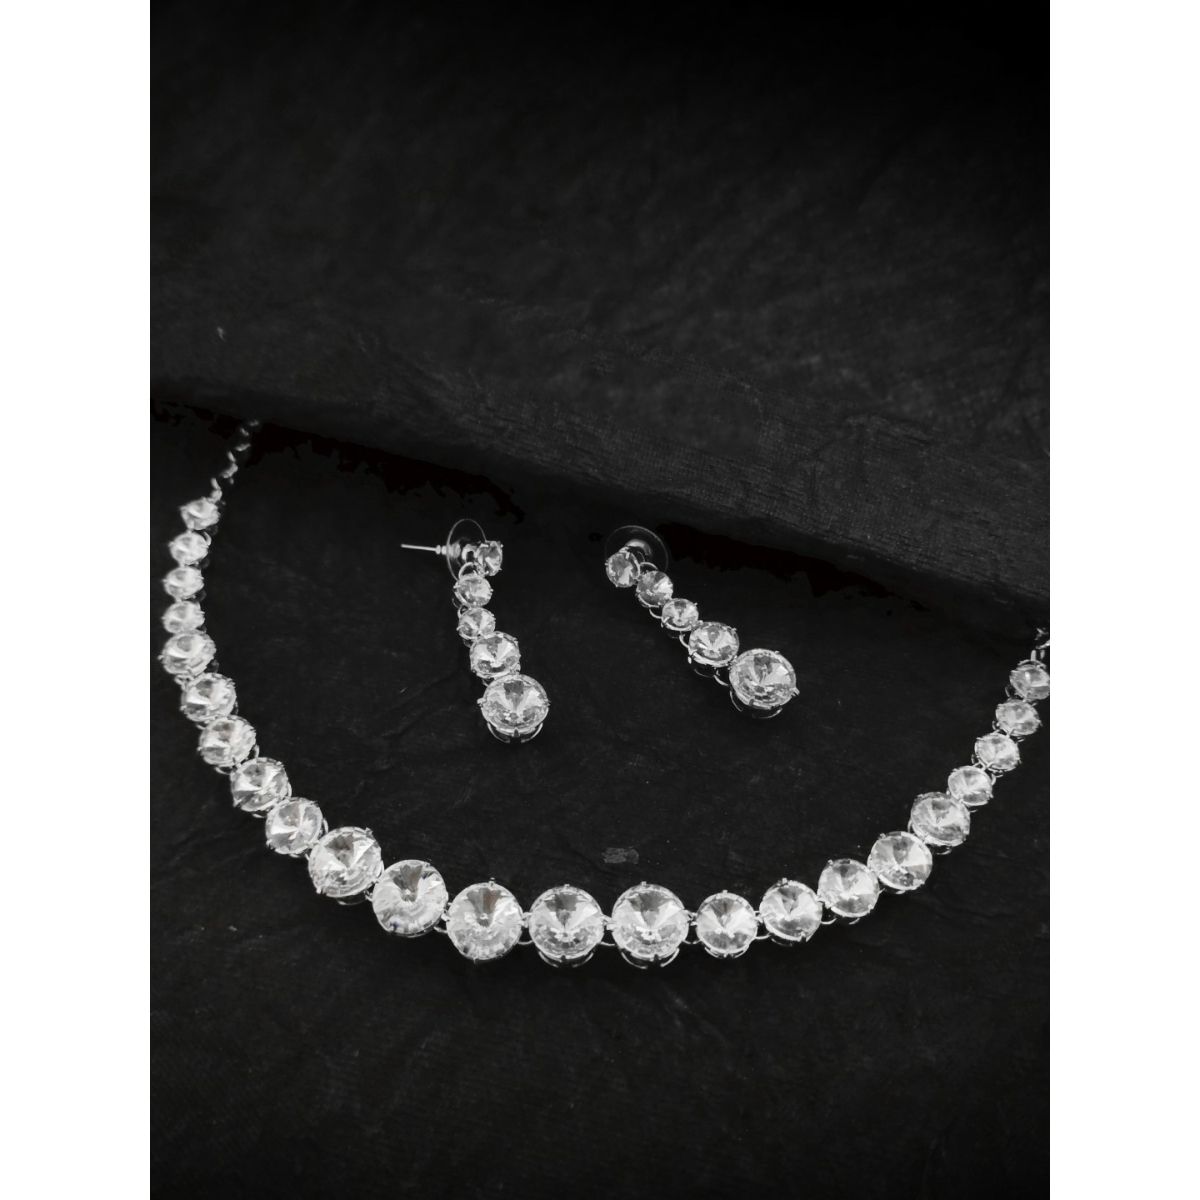 Real Diamonds Diamond Bridal Necklace With Earrings Set